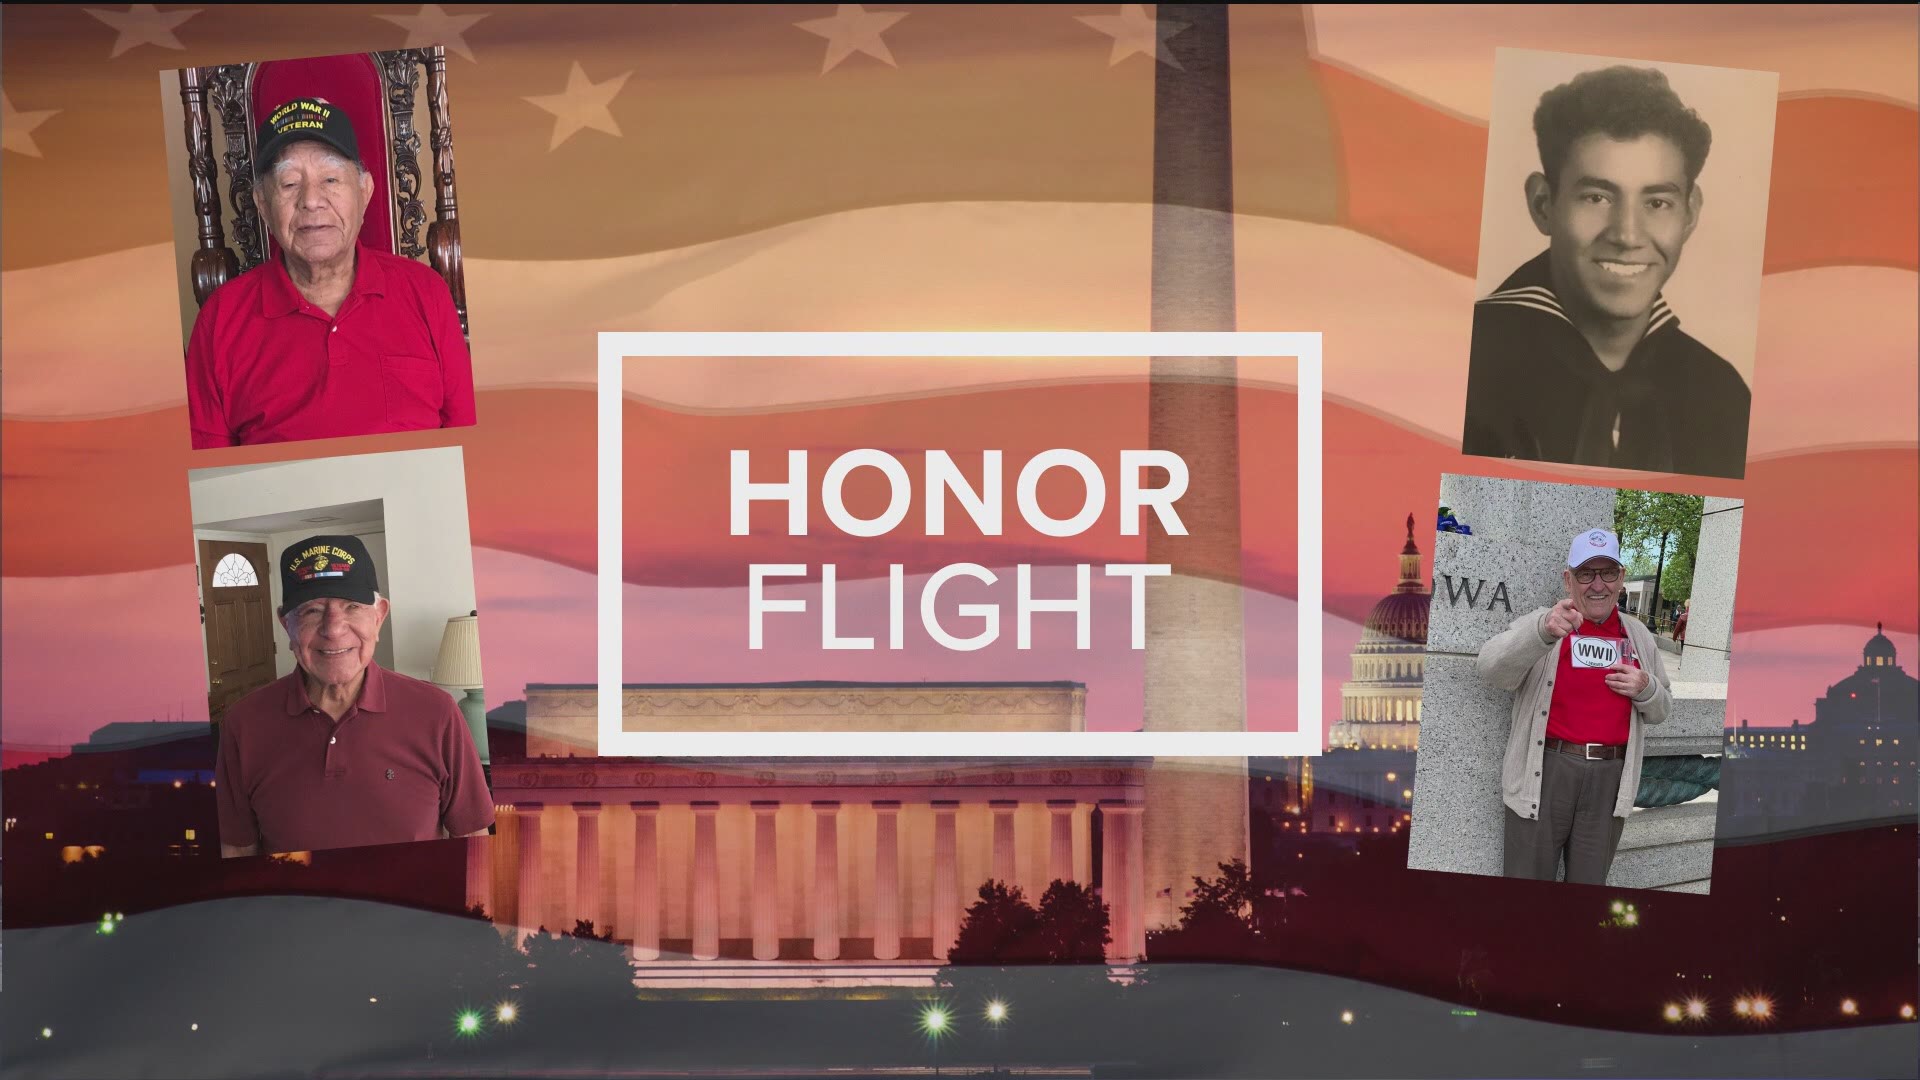 Follow News 8’s Abbie Alford on Facebook and Twitter as she goes along for this year’s San Diego Honor Flight starting Friday.